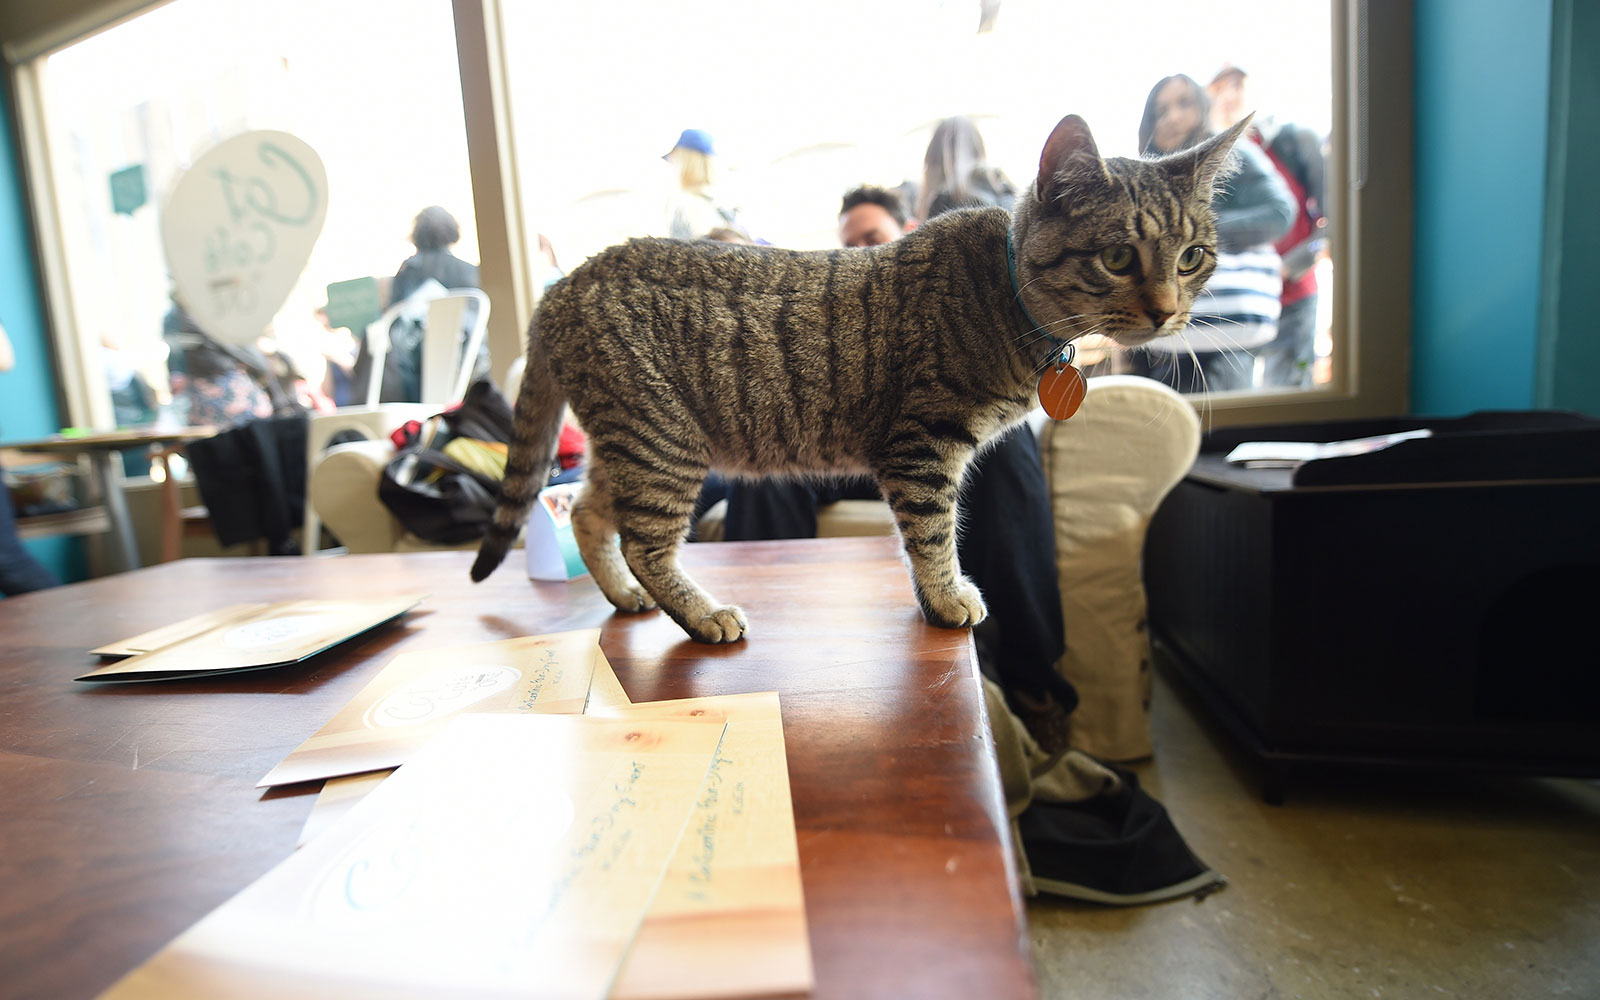 Another Cat Café Is Opening in New York City